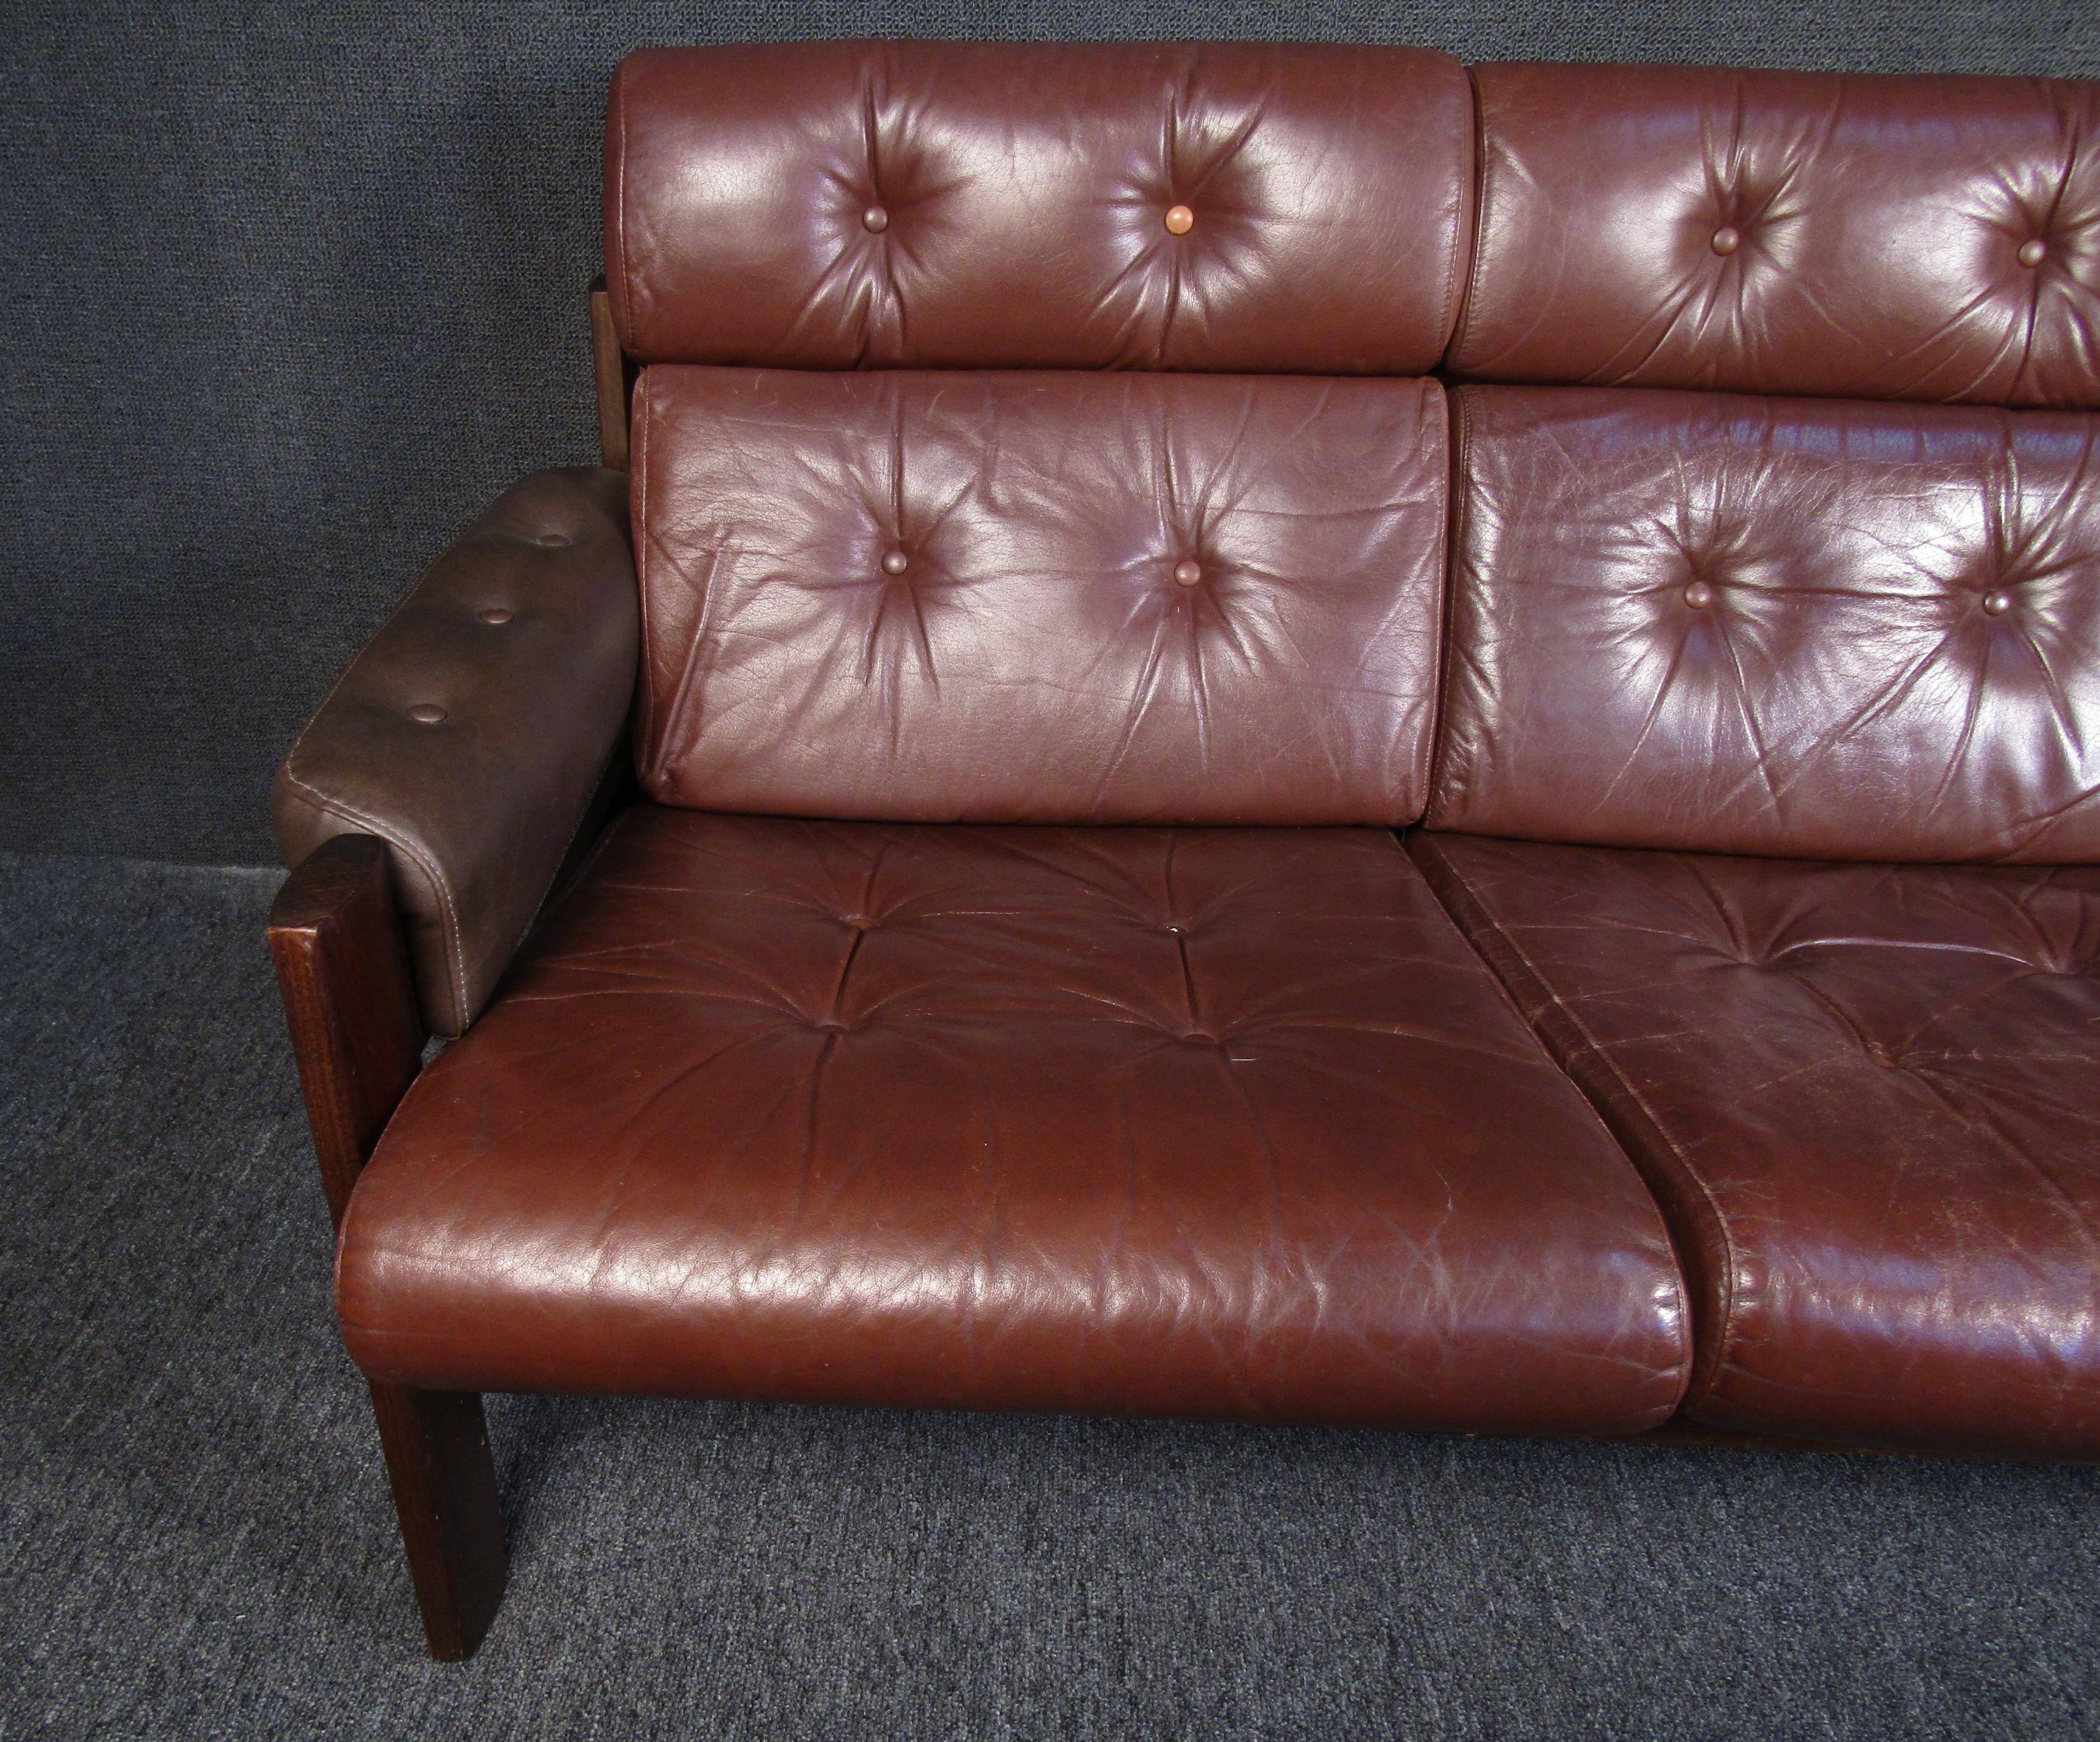 A beautiful midcentury couch that is sure to wow with its quality construction of leather and walnut wood. Burgundy leather covers most of the couch's surface while a darker shade of brown leather covers the couch's arms. The frames and legs